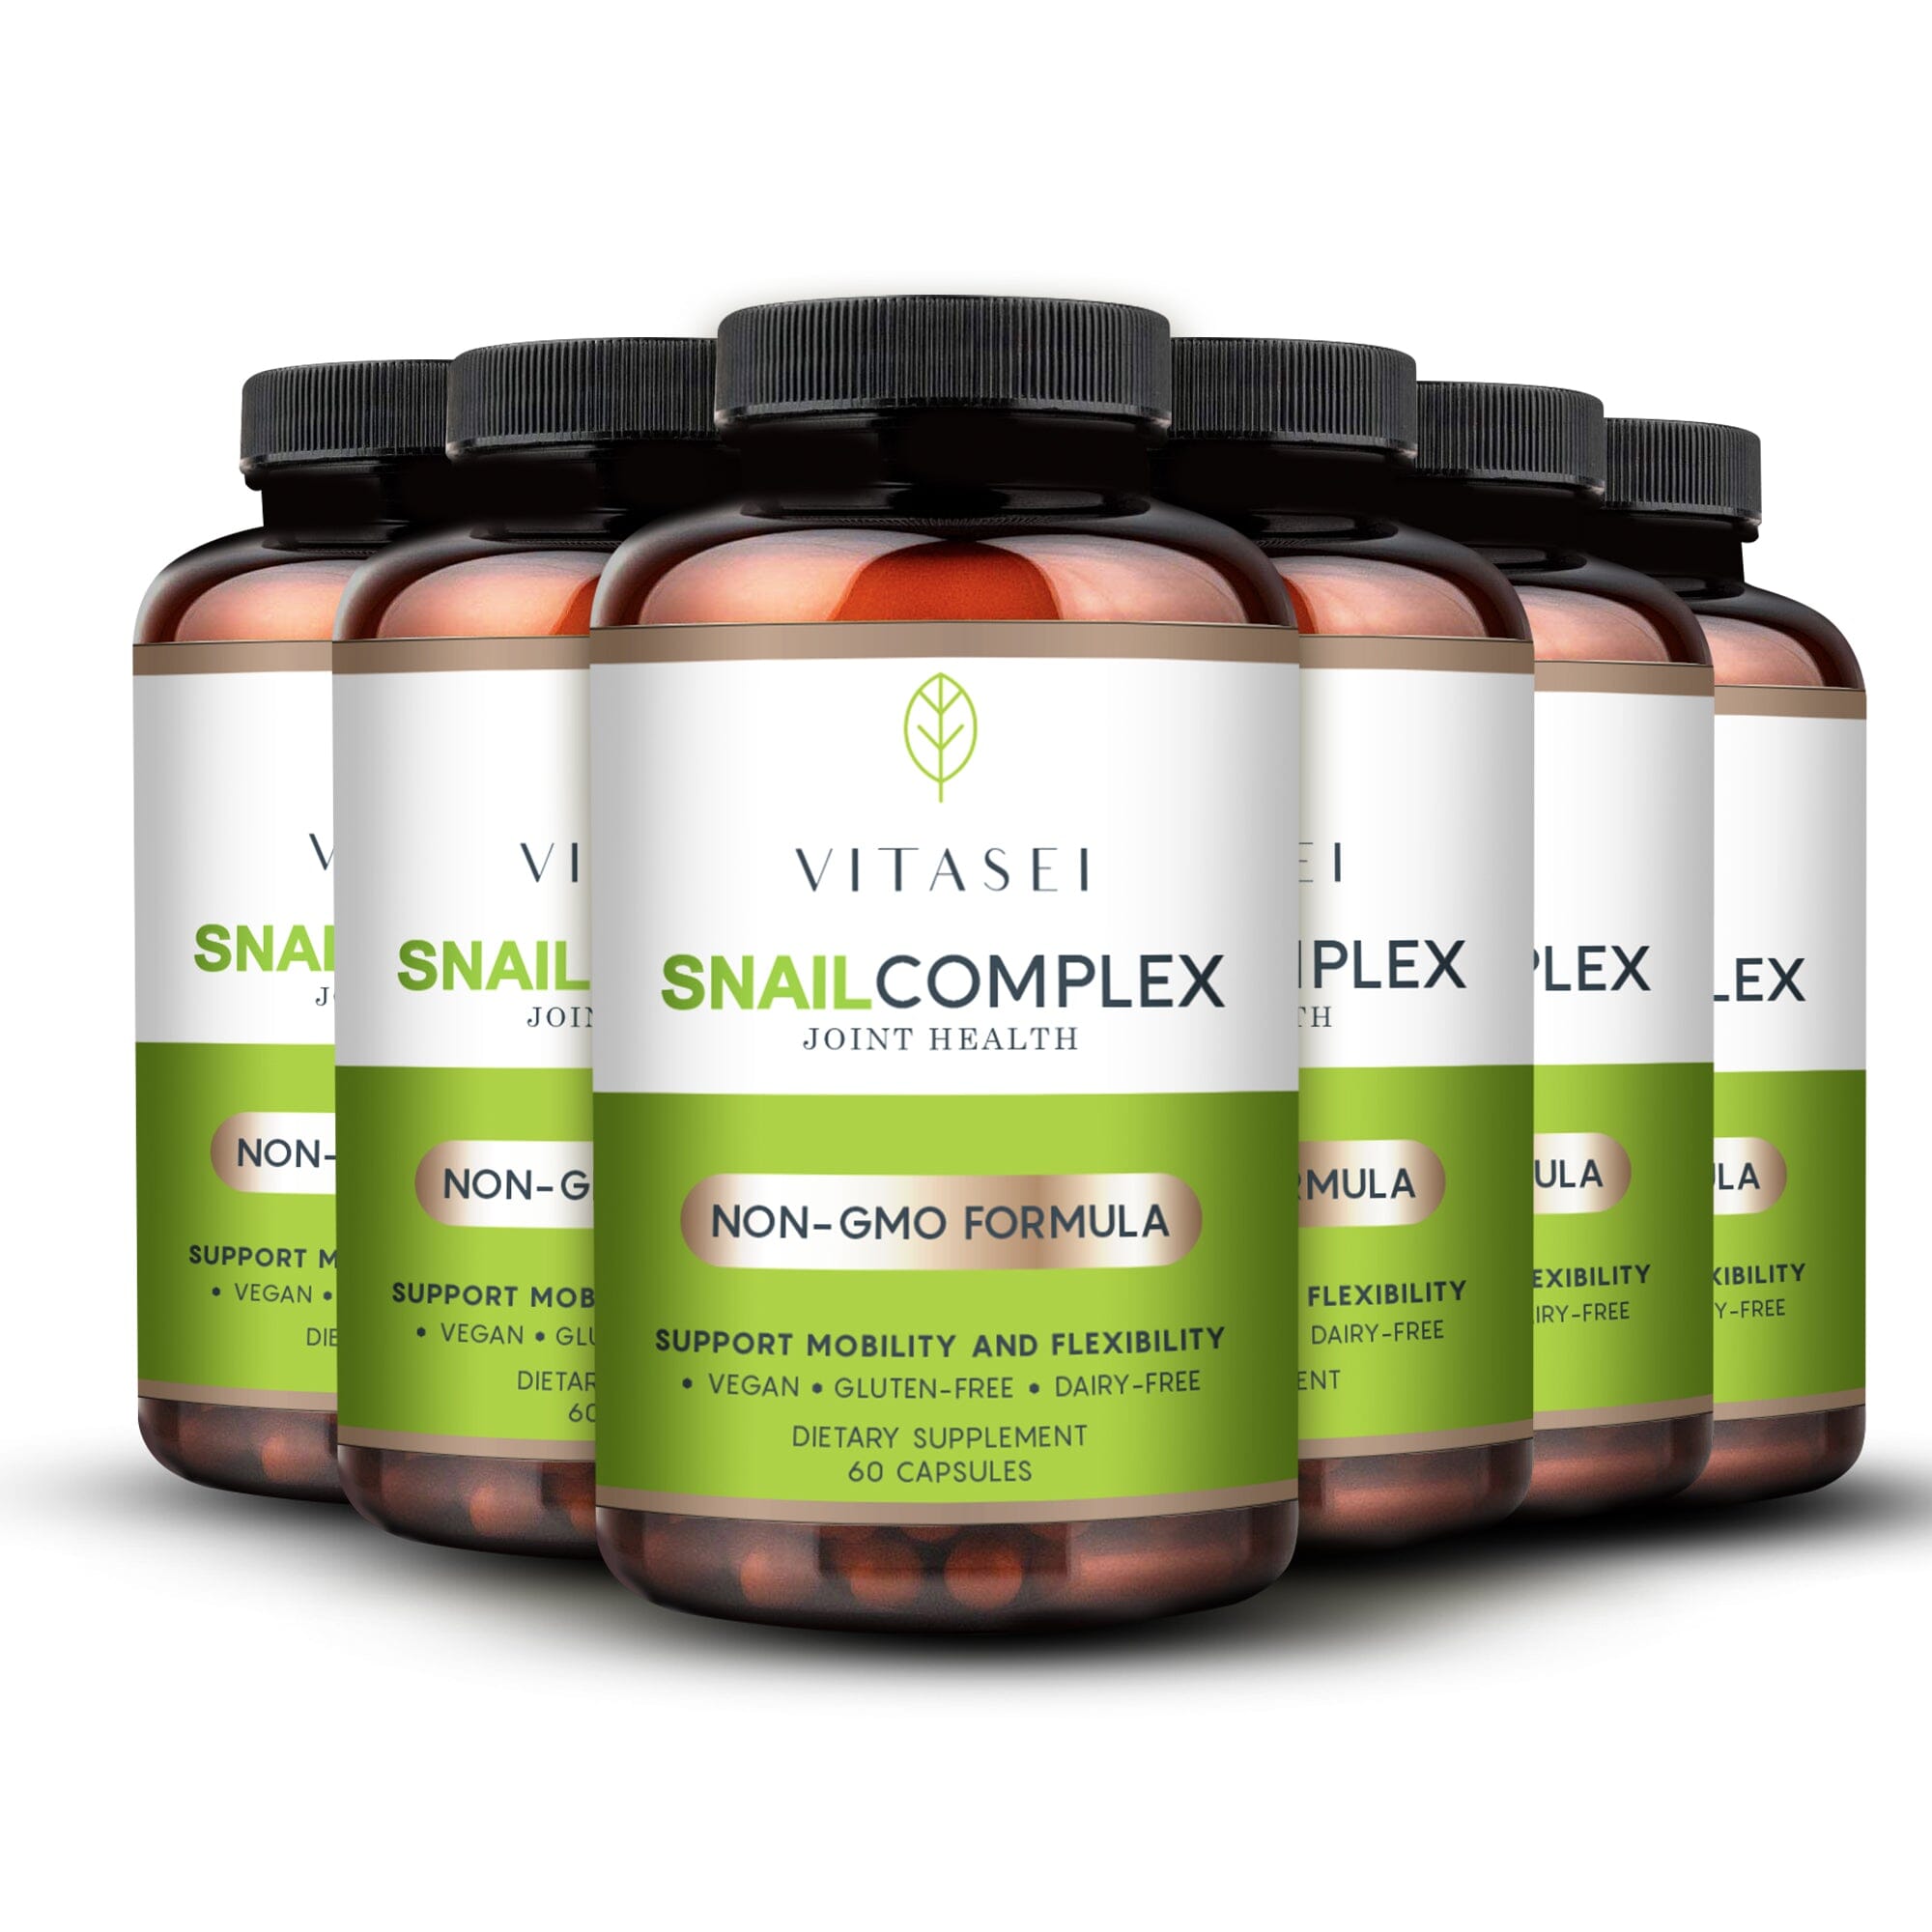 SNAIL COMPLEX JOINT HEALTH AND PAIN RELIEF